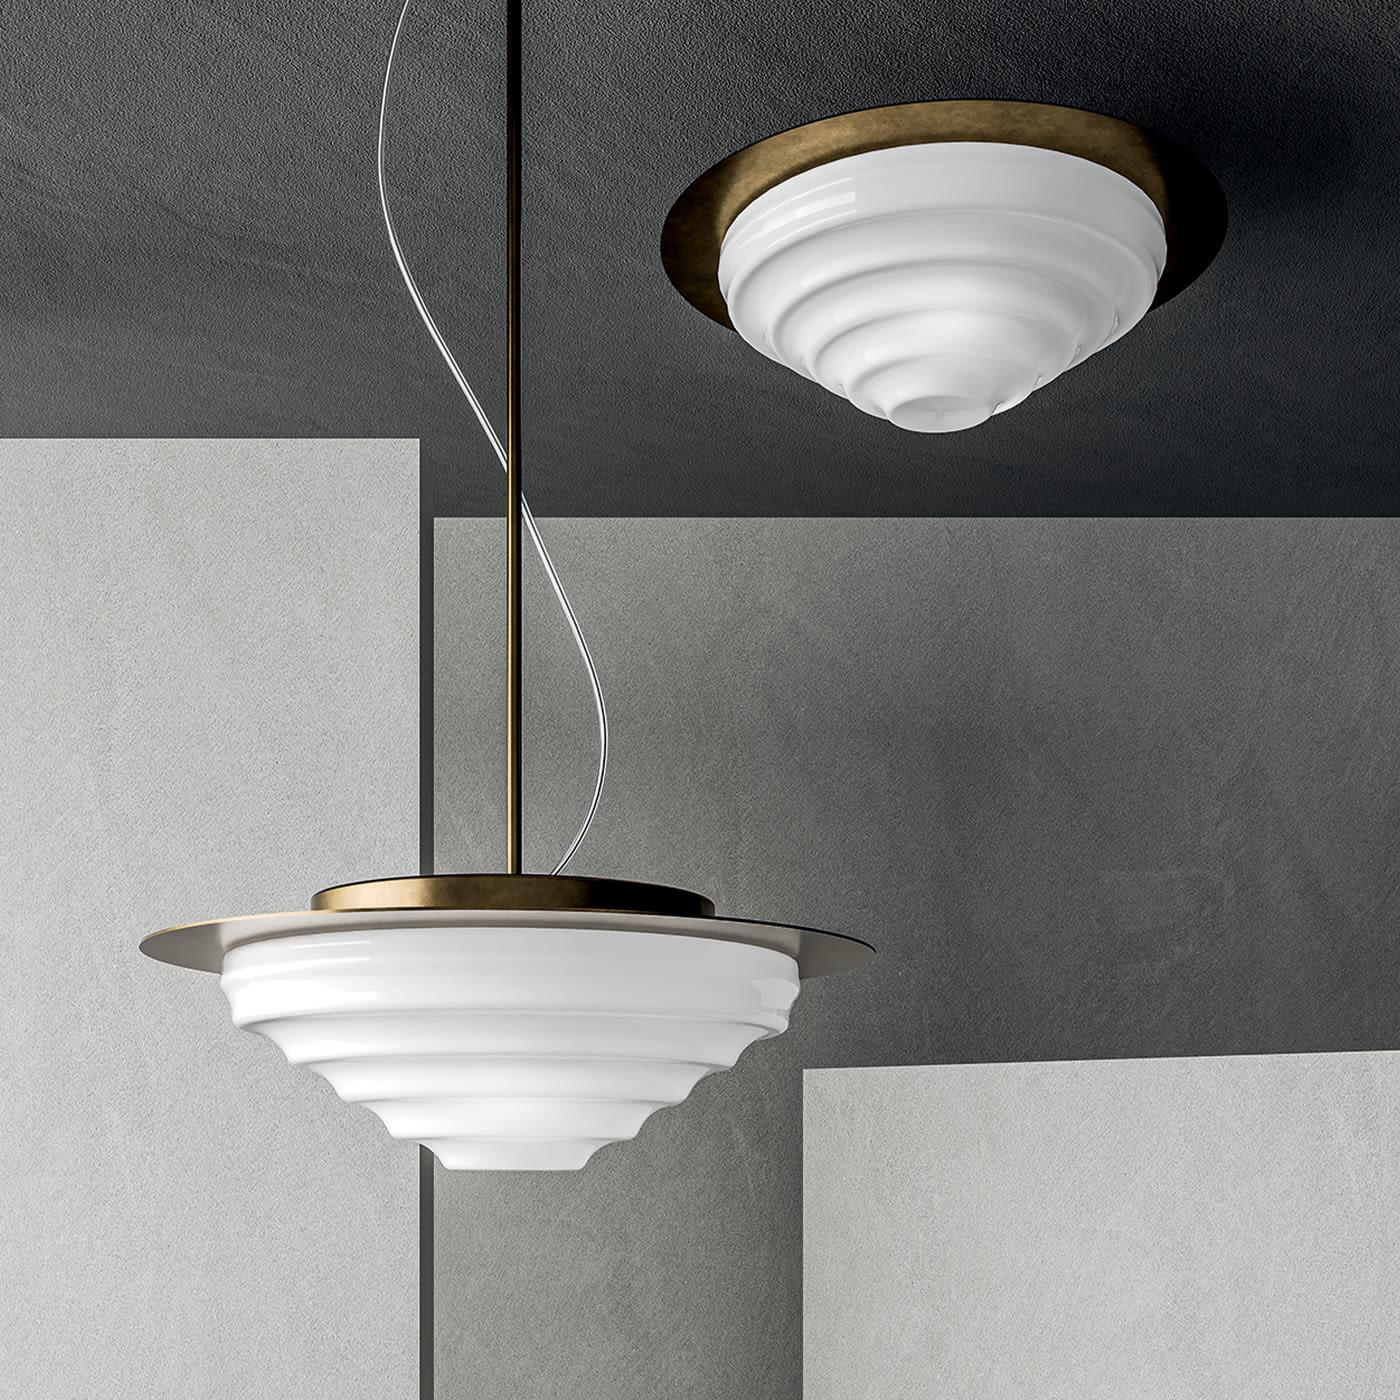 Concentric ripples recalling the water's surface distinguish this marvelous pendant lamp. Offered in a refined burnished finish, the metal structure combines a metal rod with a round plate against which the glossy white Murano glass shade stands.